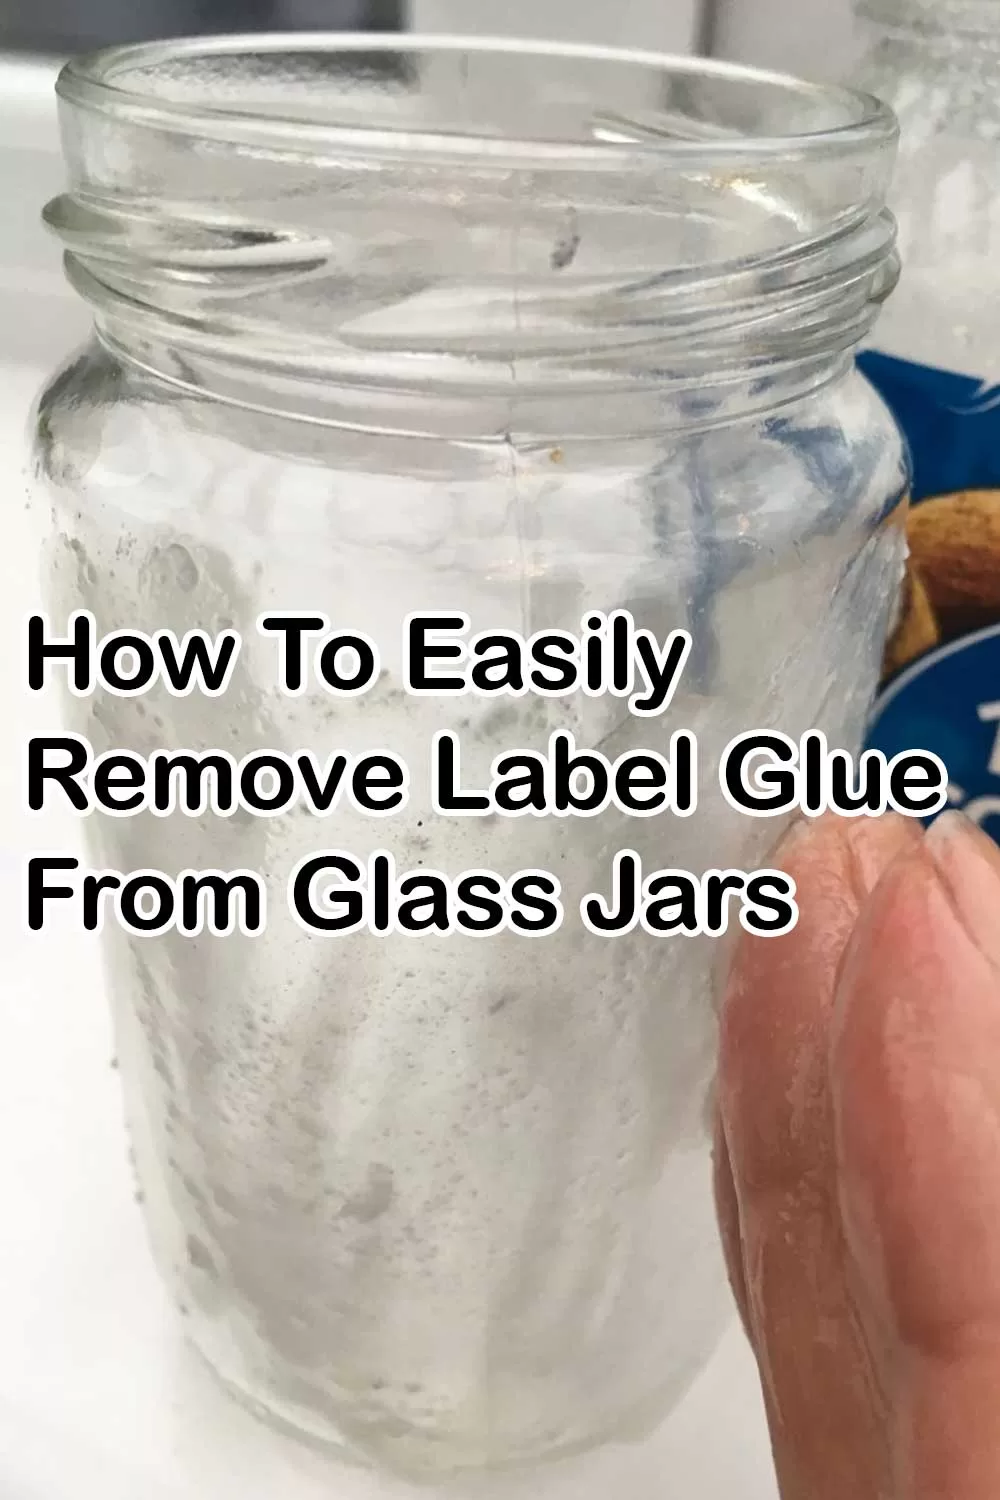 How To Easily Remove Label Glue From Glass Jars